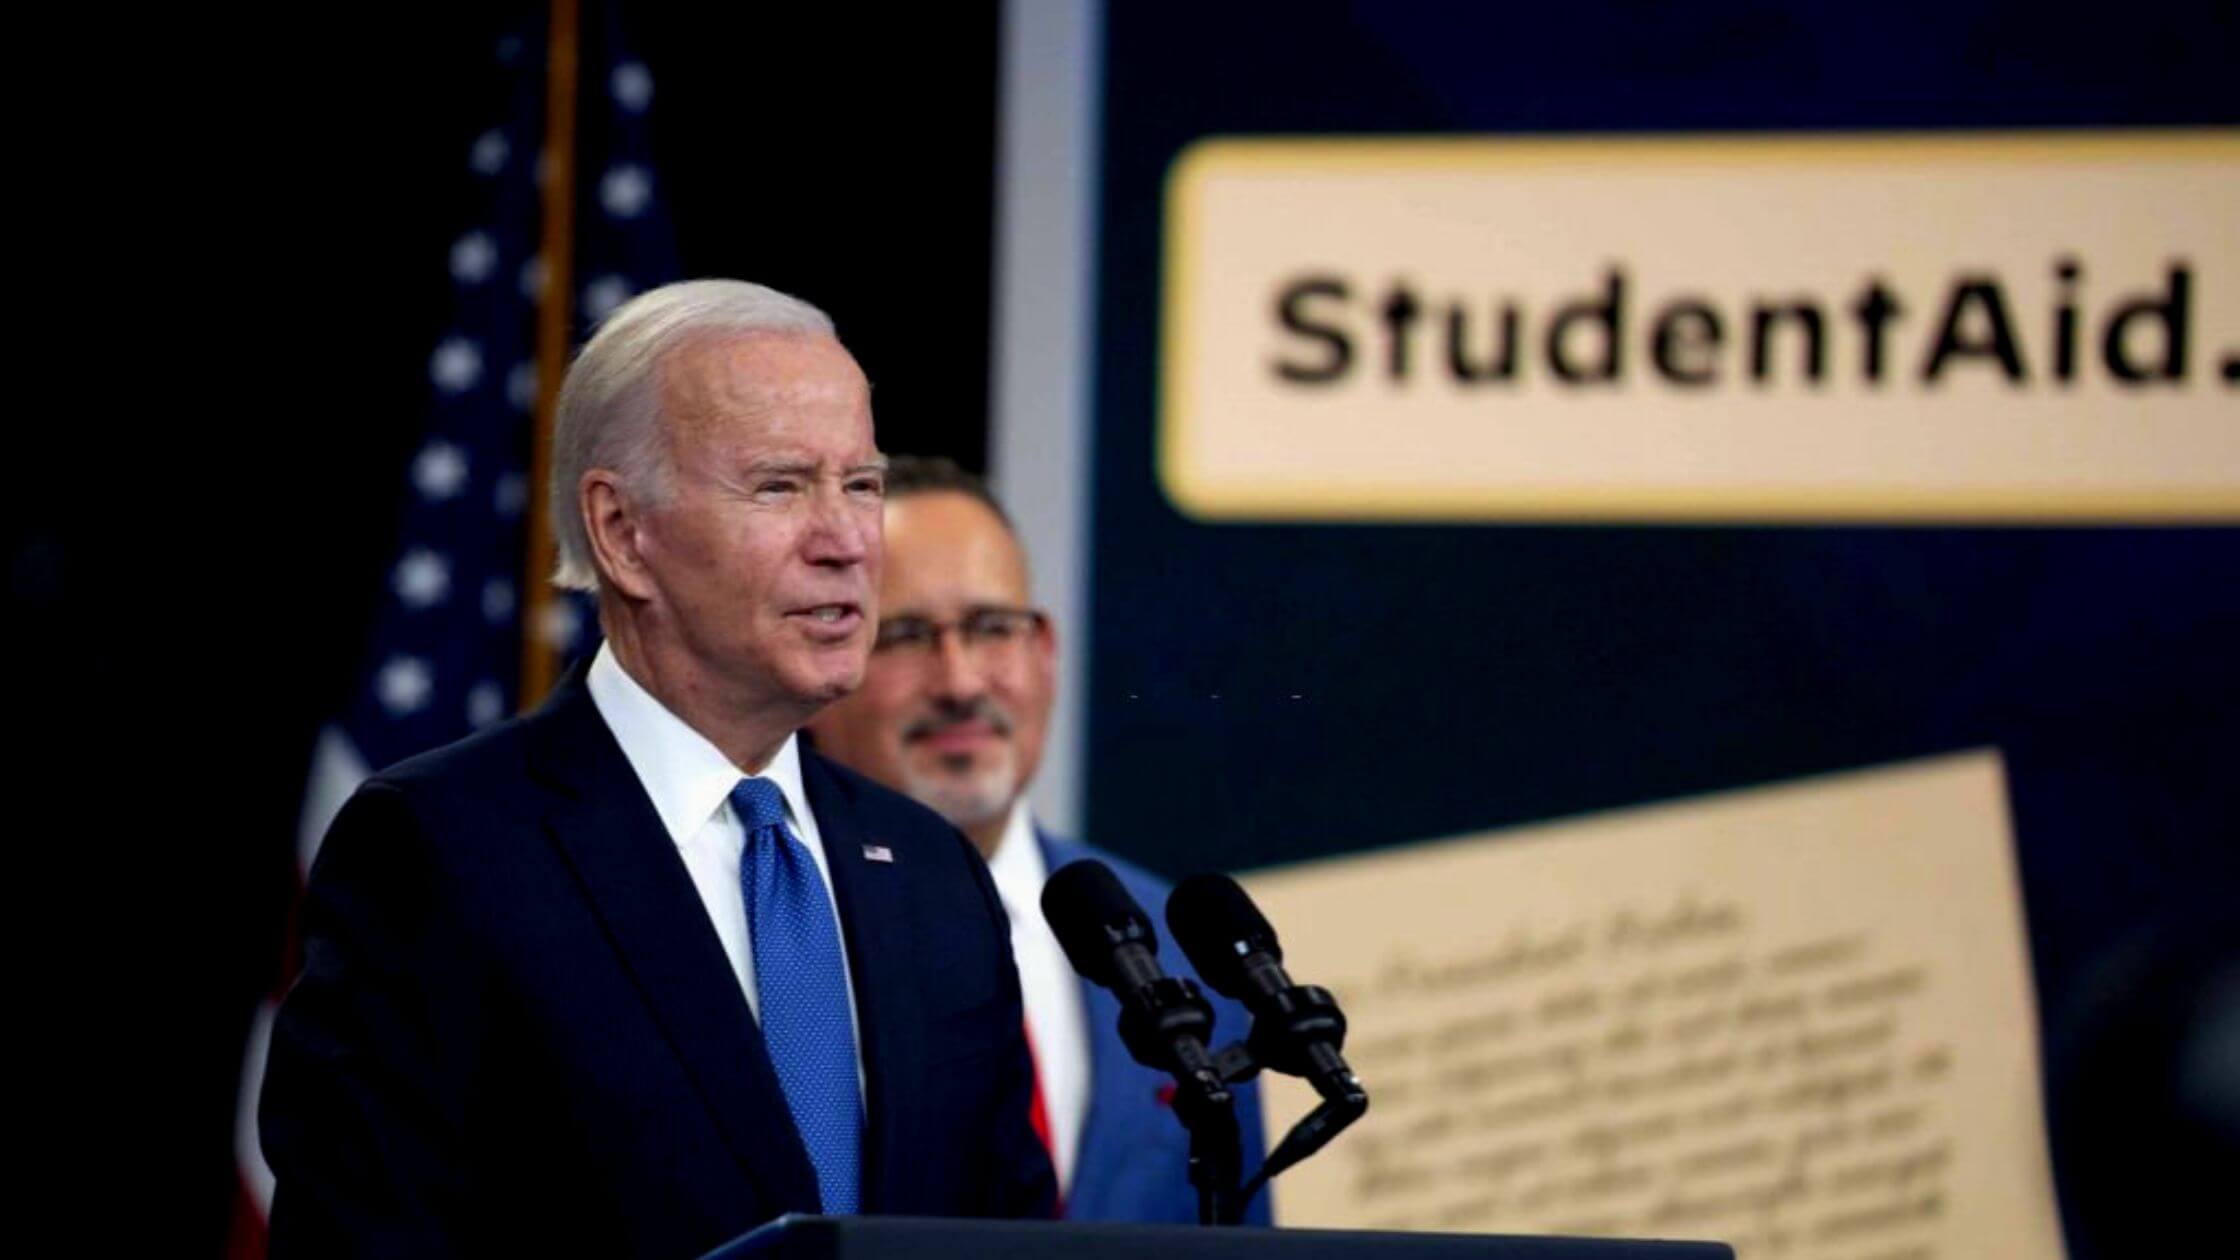 Student Loans Will Be Relieved Predicts Biden